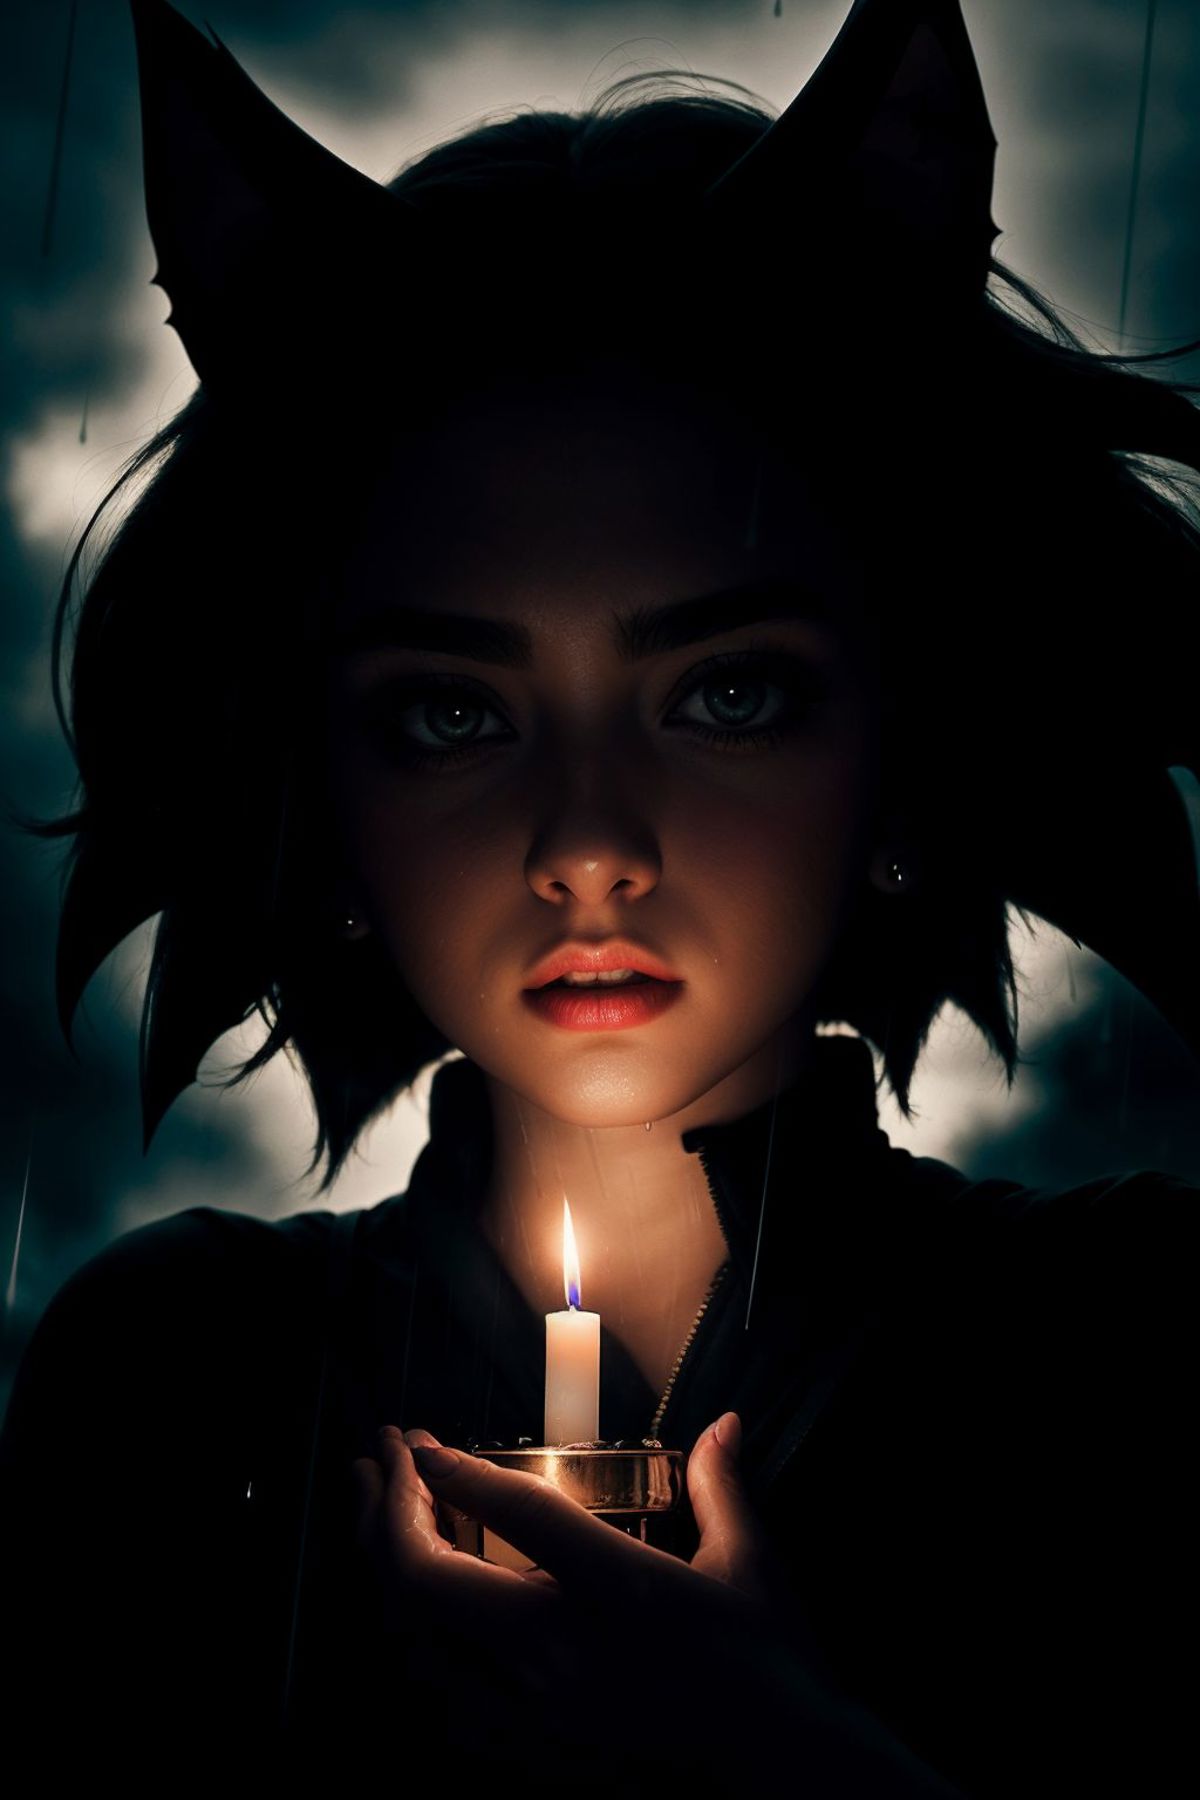 A woman holding a candle in a dark, moody setting.